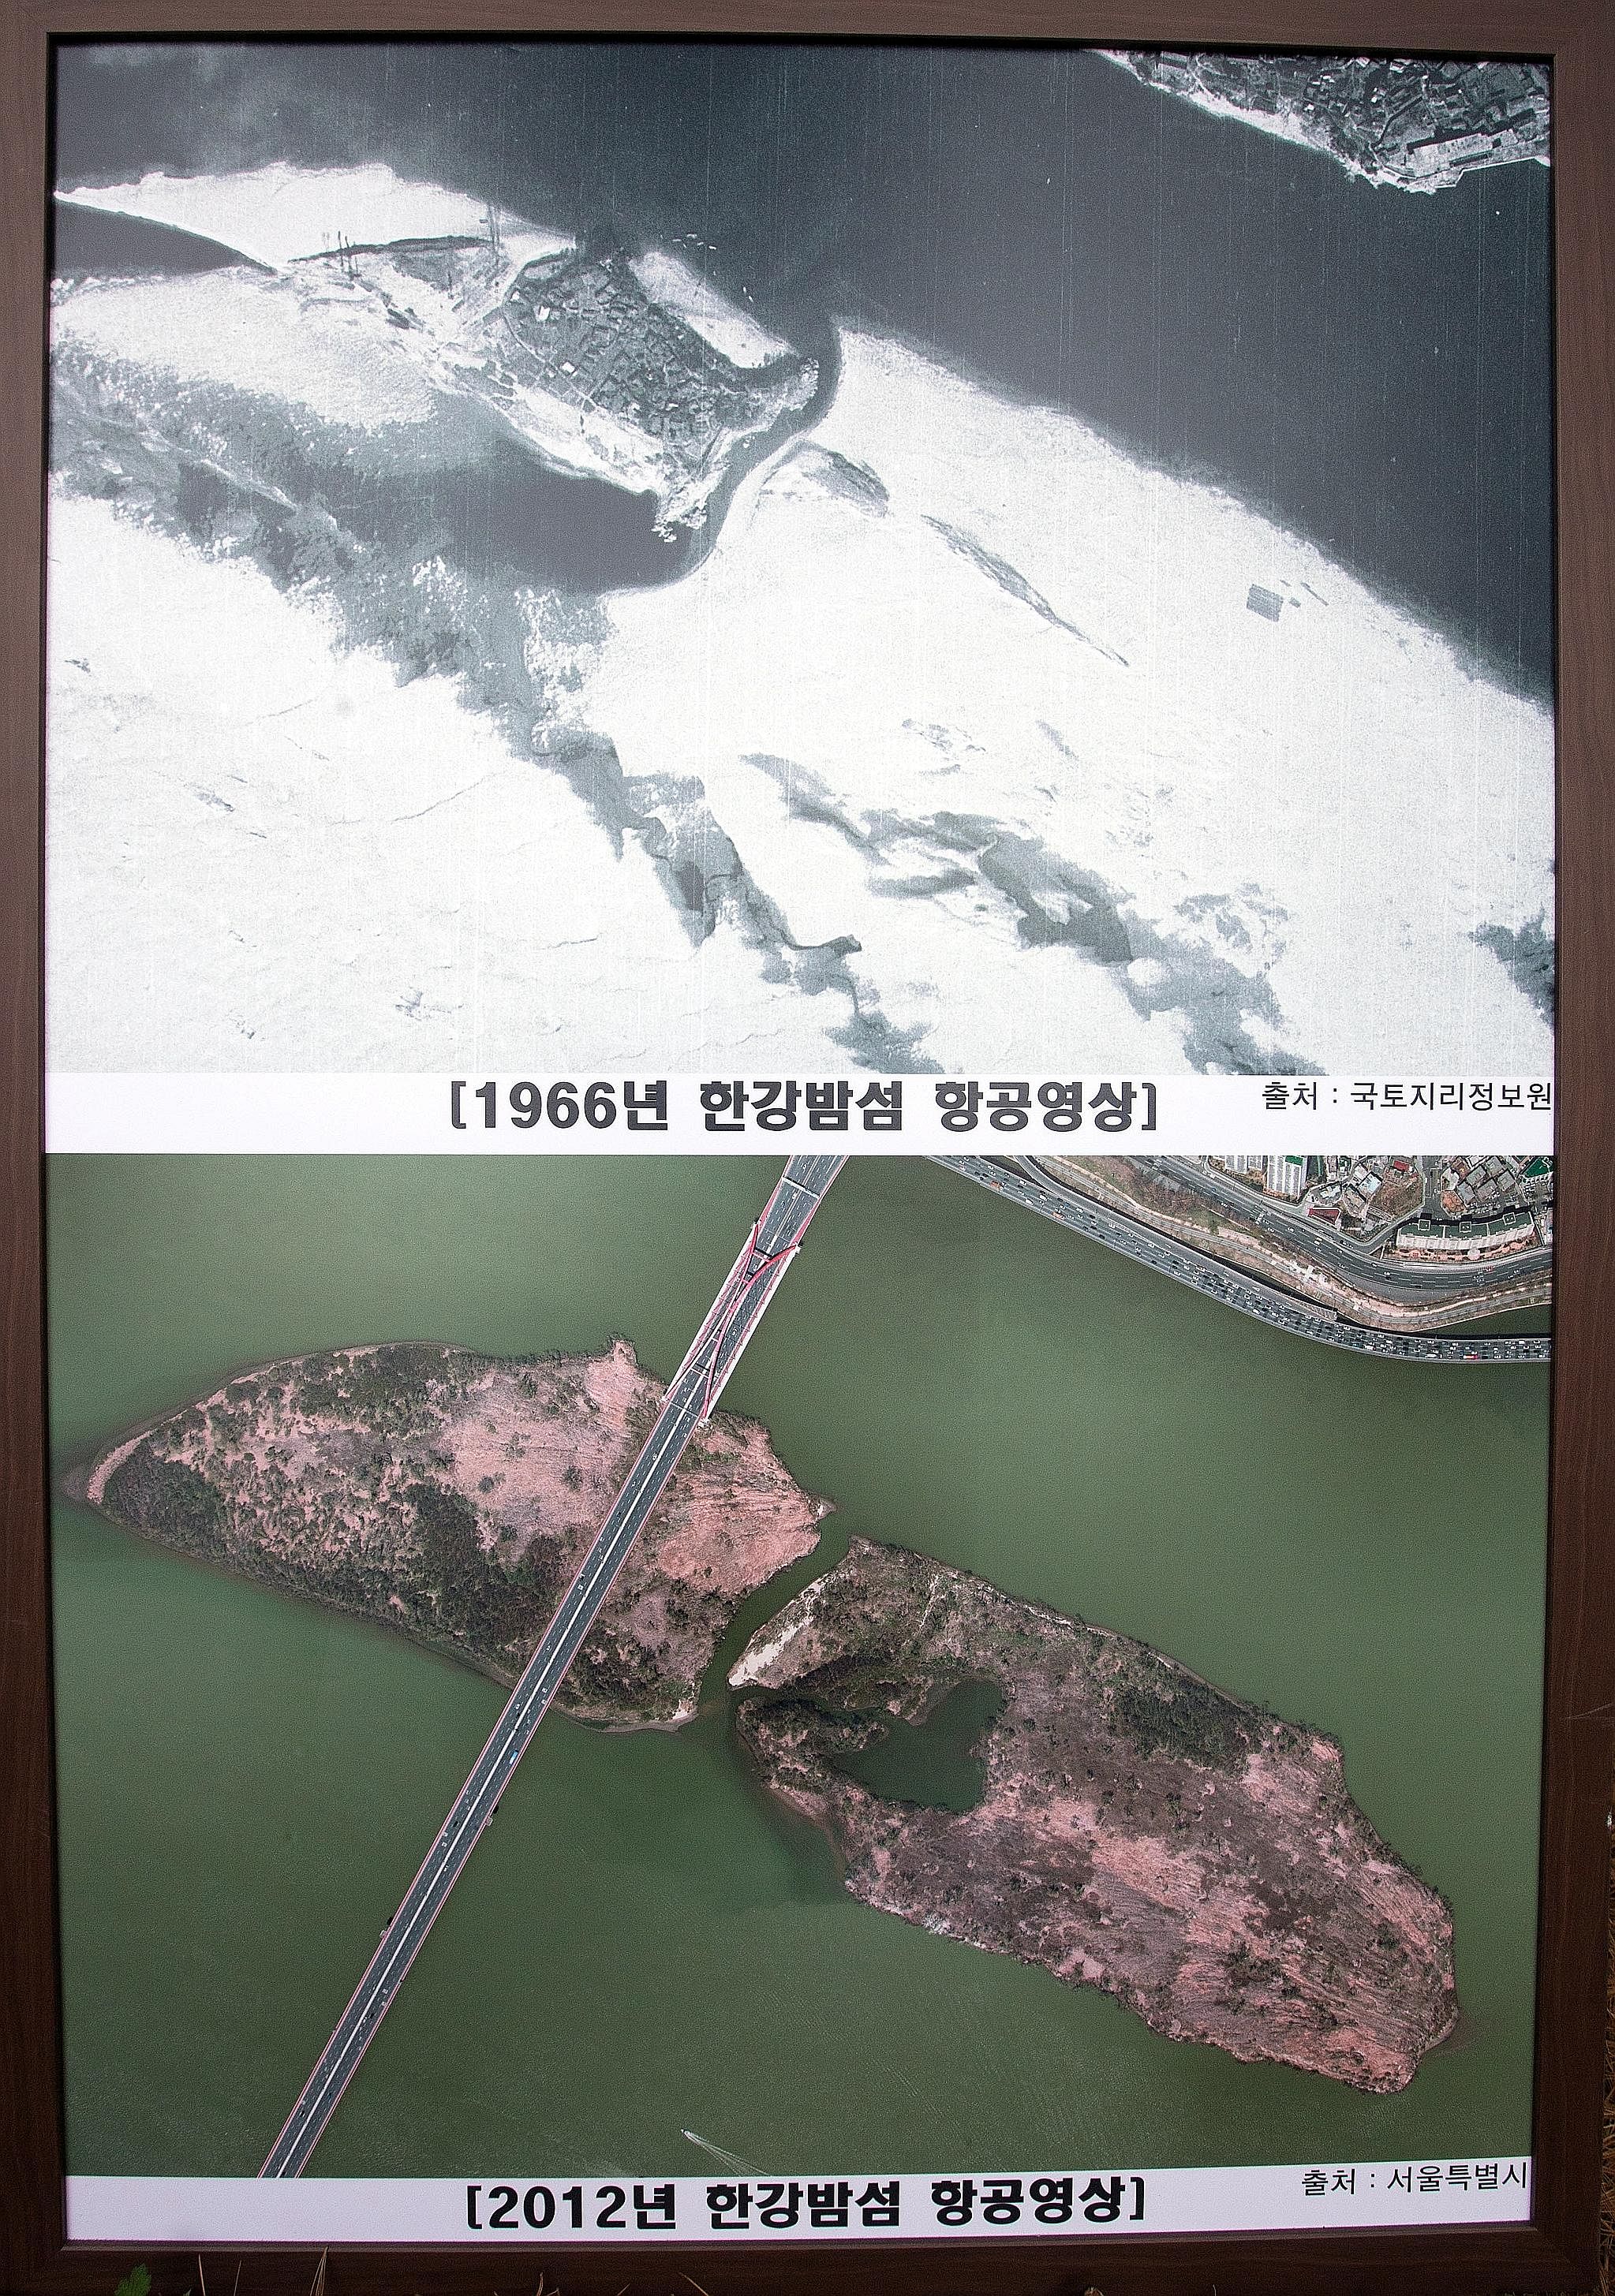 Bamseom - which means chestnut island in Korean - was "reborn" after its demolition as the river deposited sediment and sand, expanding its area by about 4,400 sq m a year. It is now about 280,000 sq m, half the size of Singapore's Coney Island and s